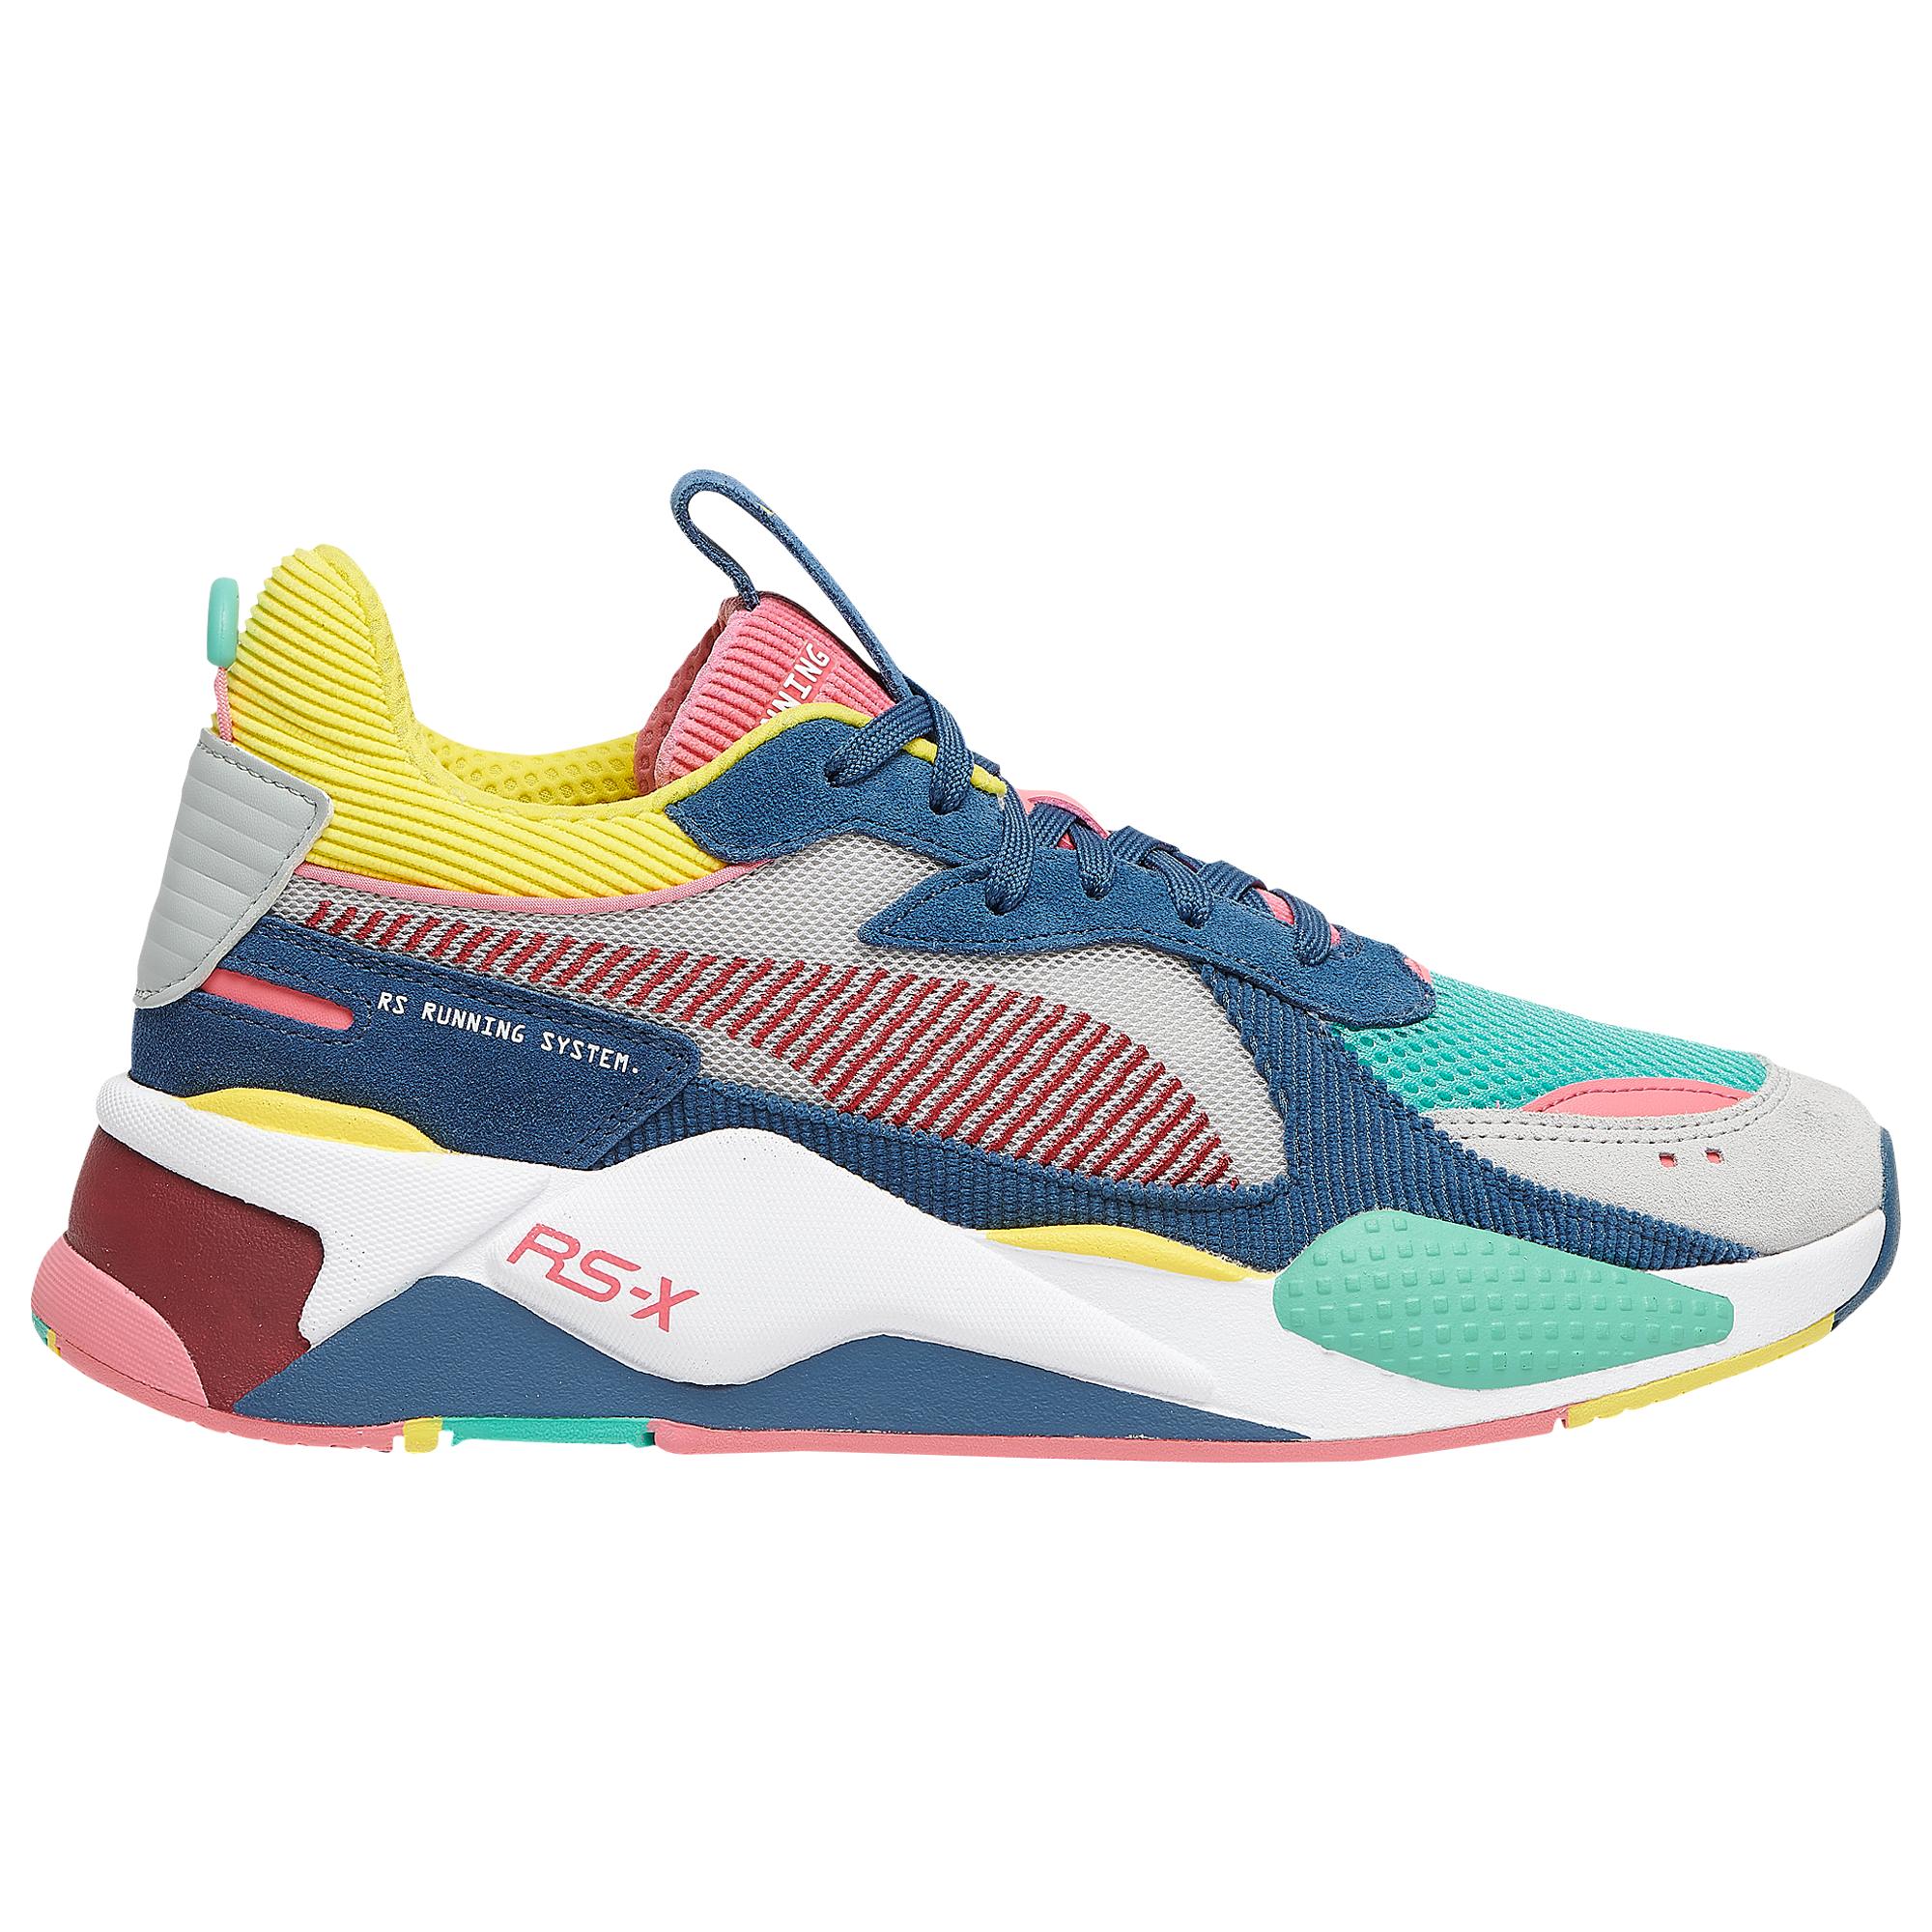 PUMA Rs-x - Shoes in Gray/Pink/Blue (Blue) for Men - Lyst